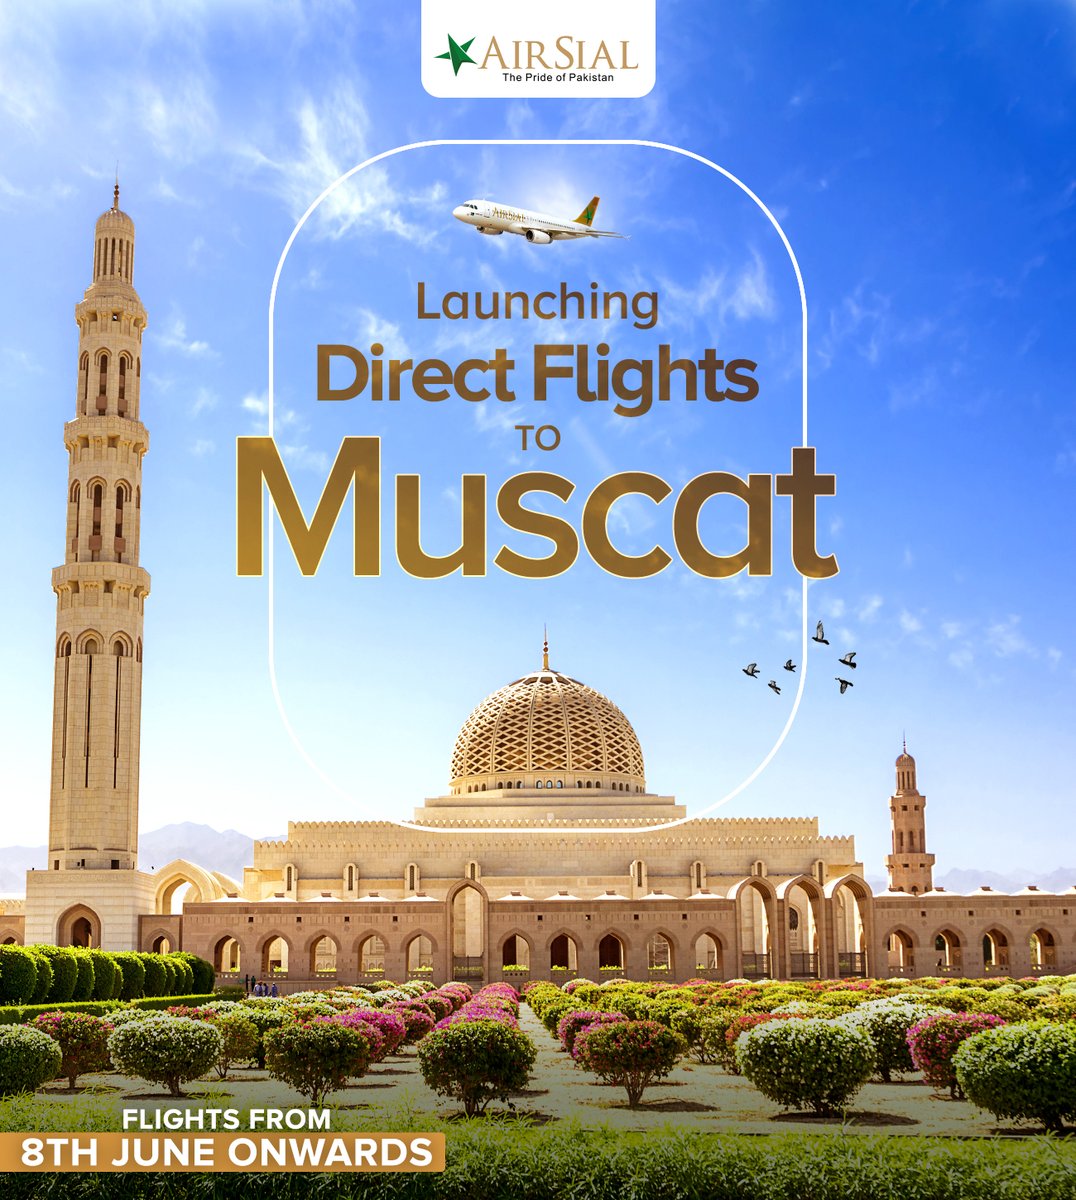 We're proudly launching Daily Flights to Muscat, Oman from 8th June onwards 🇴🇲 ✈️

#AirSial - The Pride of #Pakistan 🇵🇰